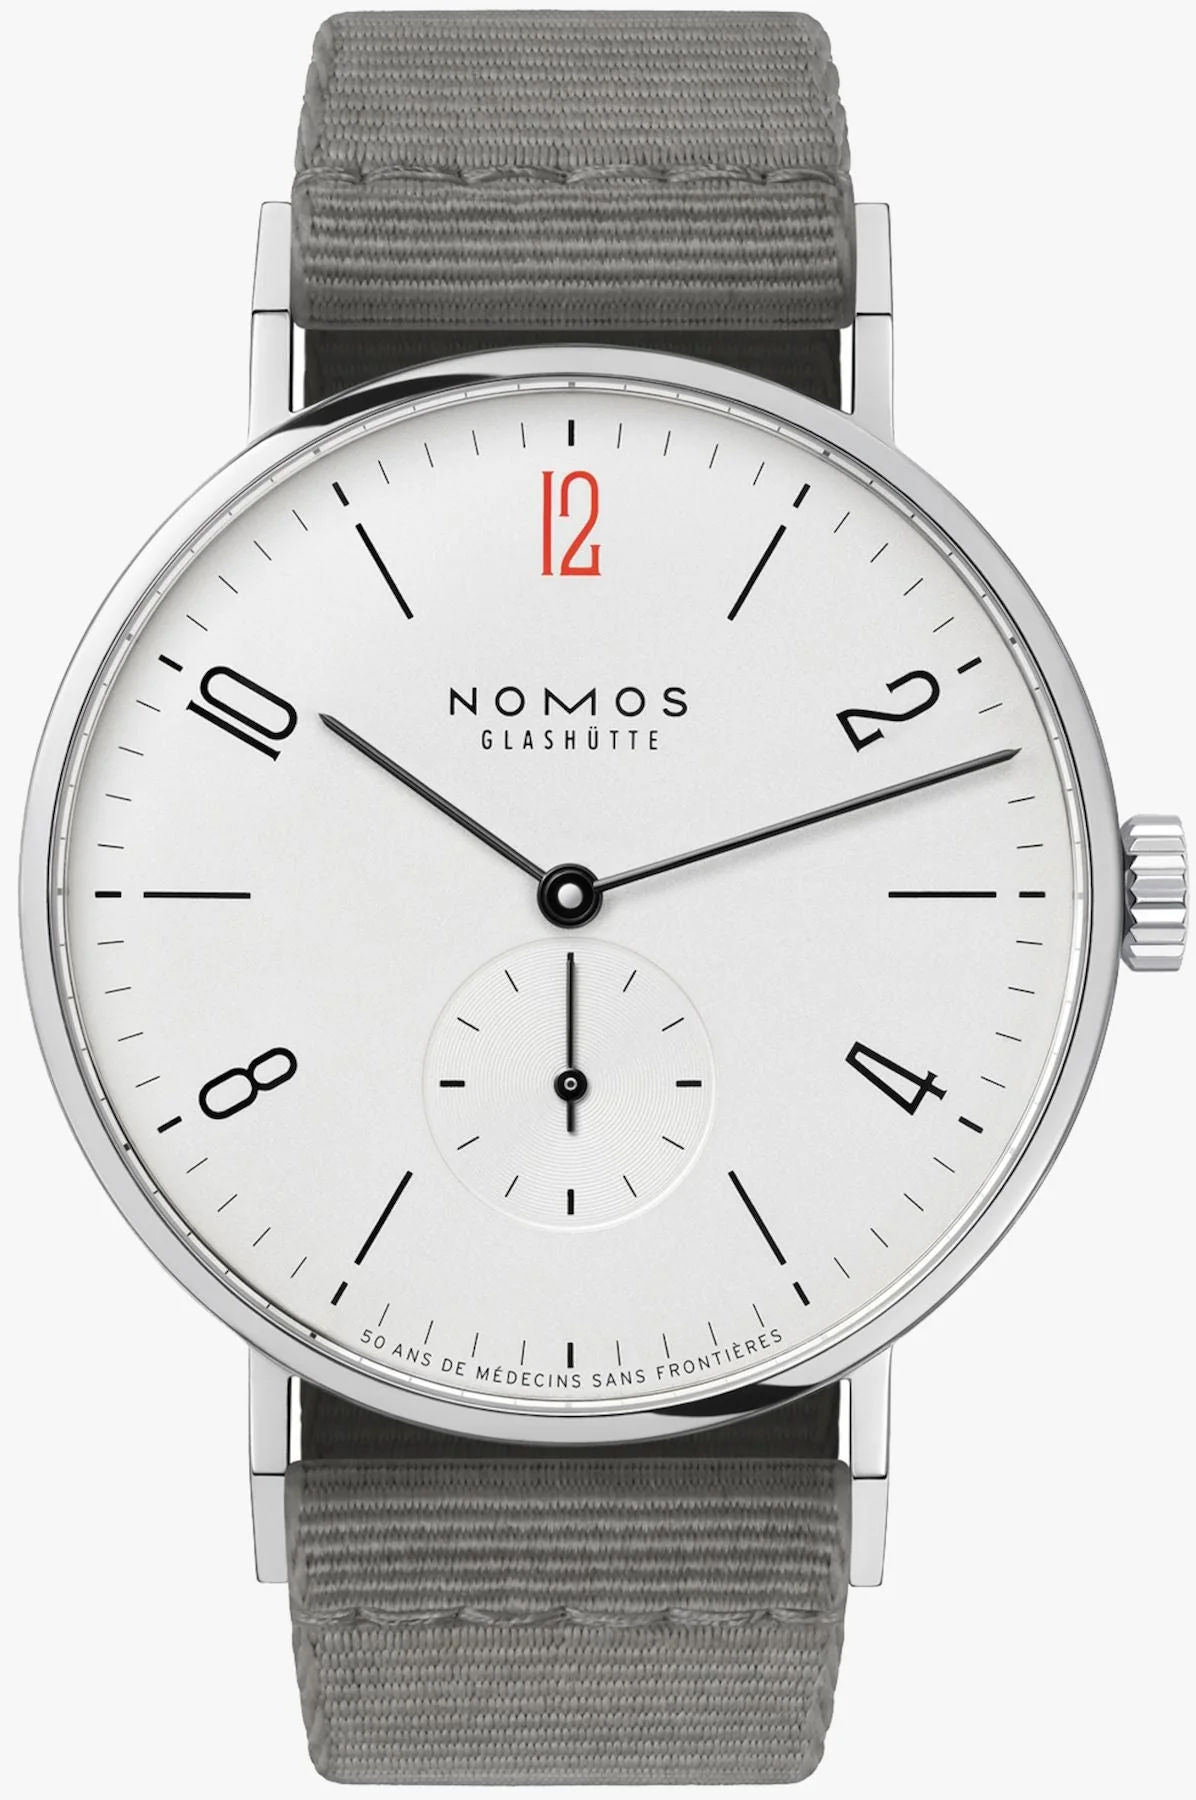 NOMOS GLASHUTTE TANGENTE 38 DOCTORS WITHOUT BORDERS 50 YEARS ANNIVERSARY – (165.S50)